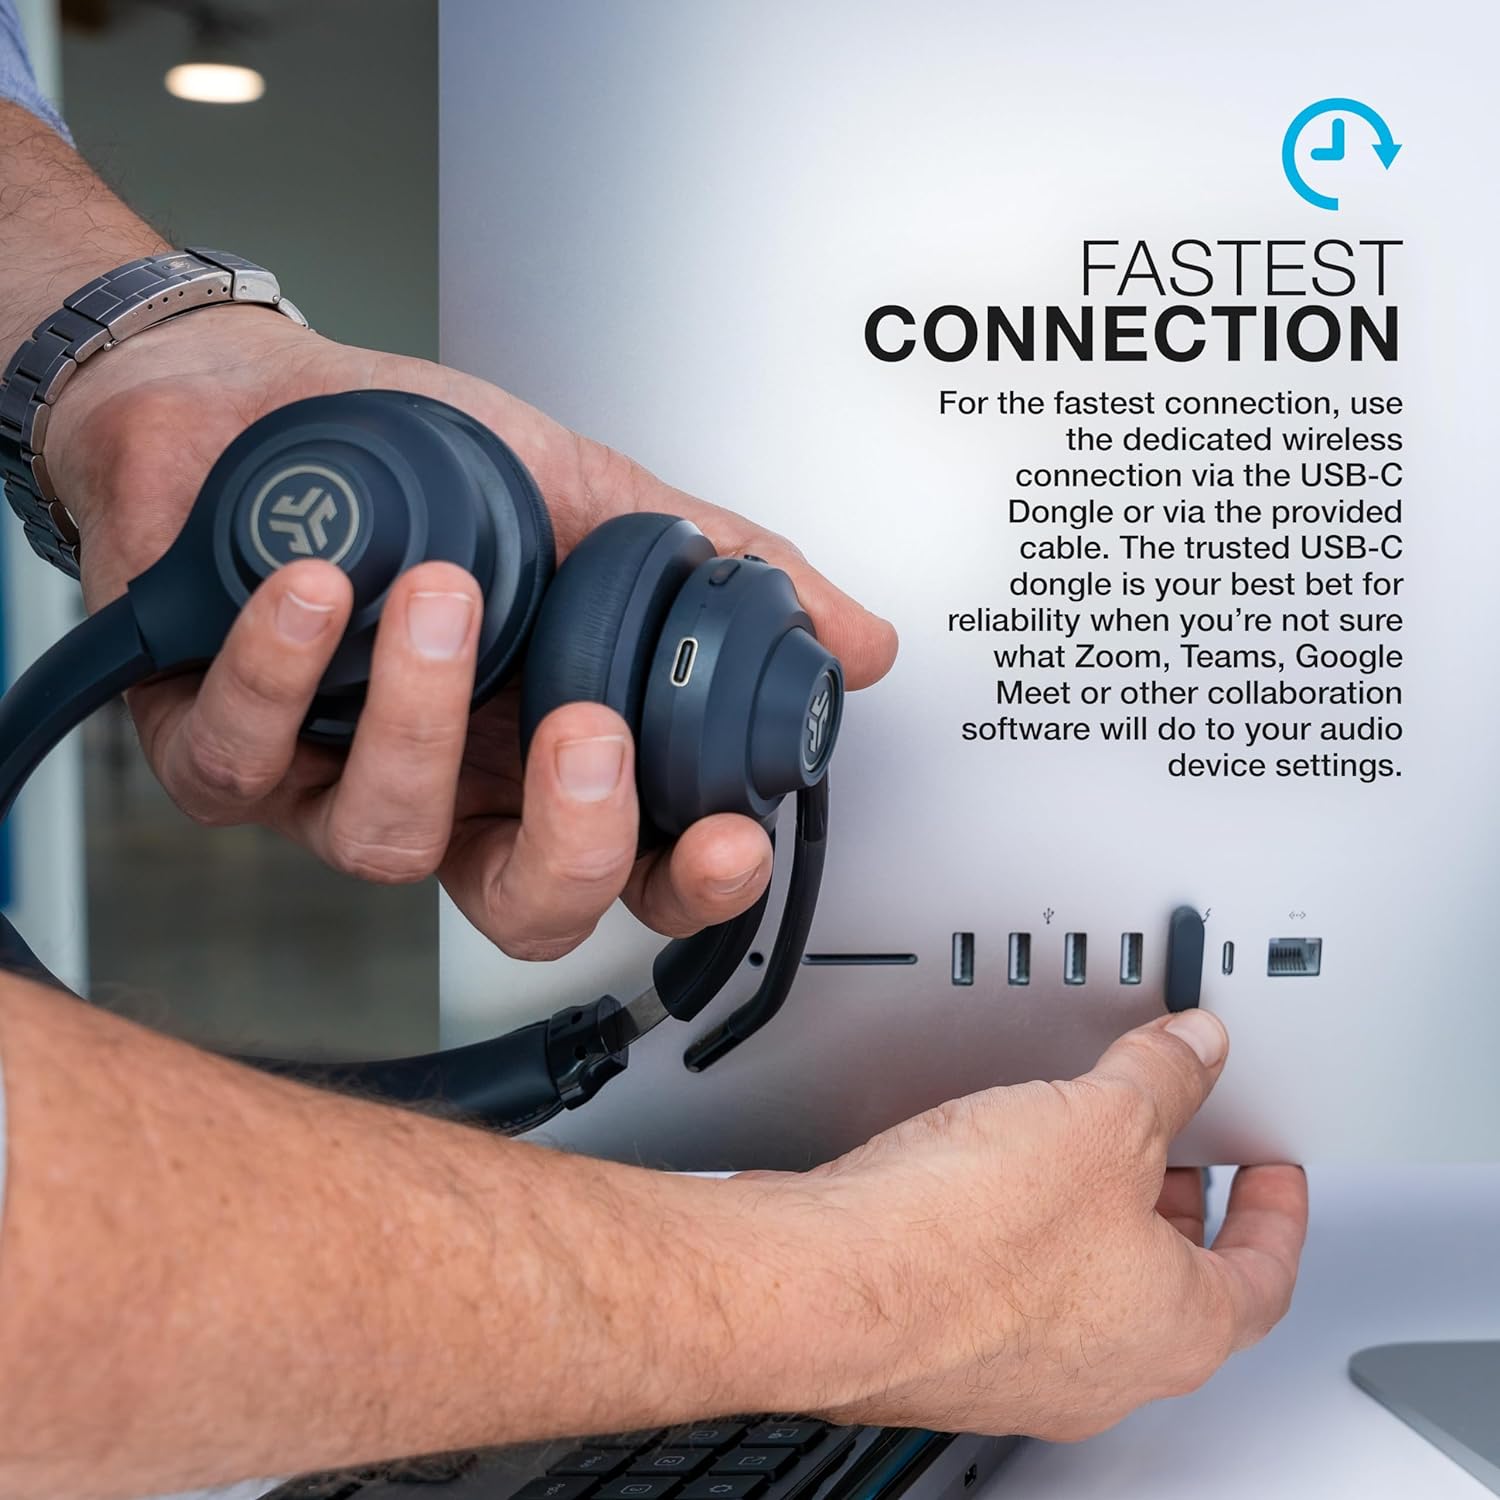 thinkstar Wireless Headsets with Microphone - 55+ Playtime PC Bluetooth Headset and Multipoint Connect to Laptop Computer and Mobile - Wir